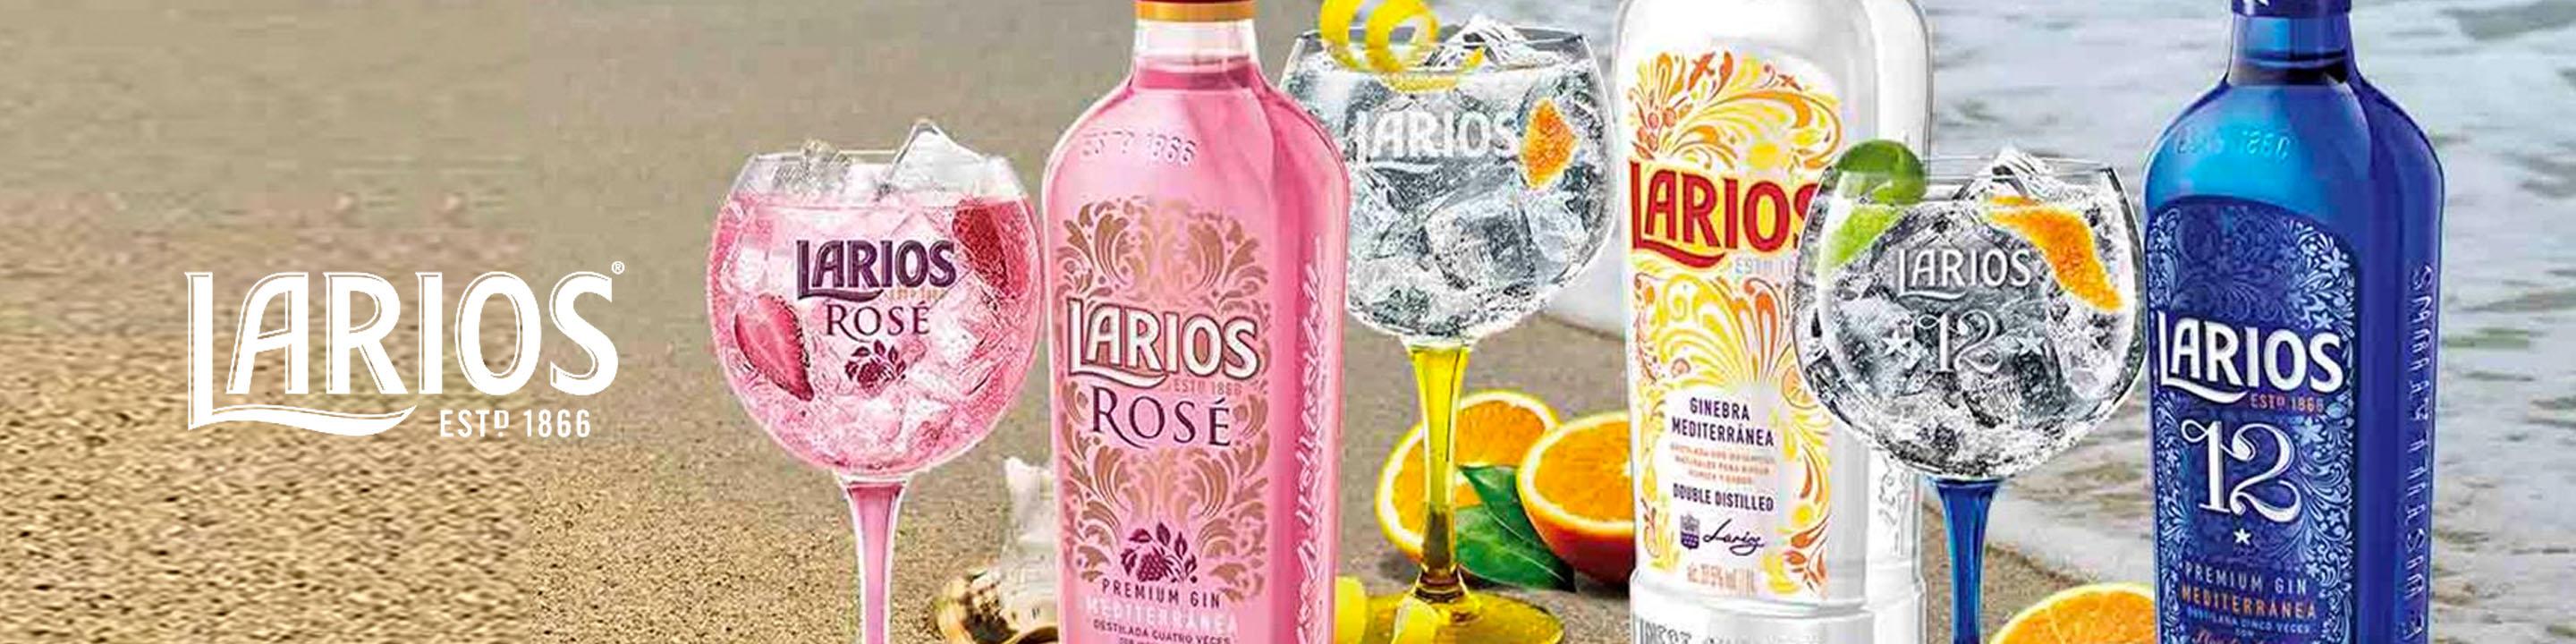 Larios undergoes double distillation and is characterized by clarity, freshness of aroma and delicate citrus flavor.

Buy Larios online now from nearby liquor stores via Minibar Delivery.